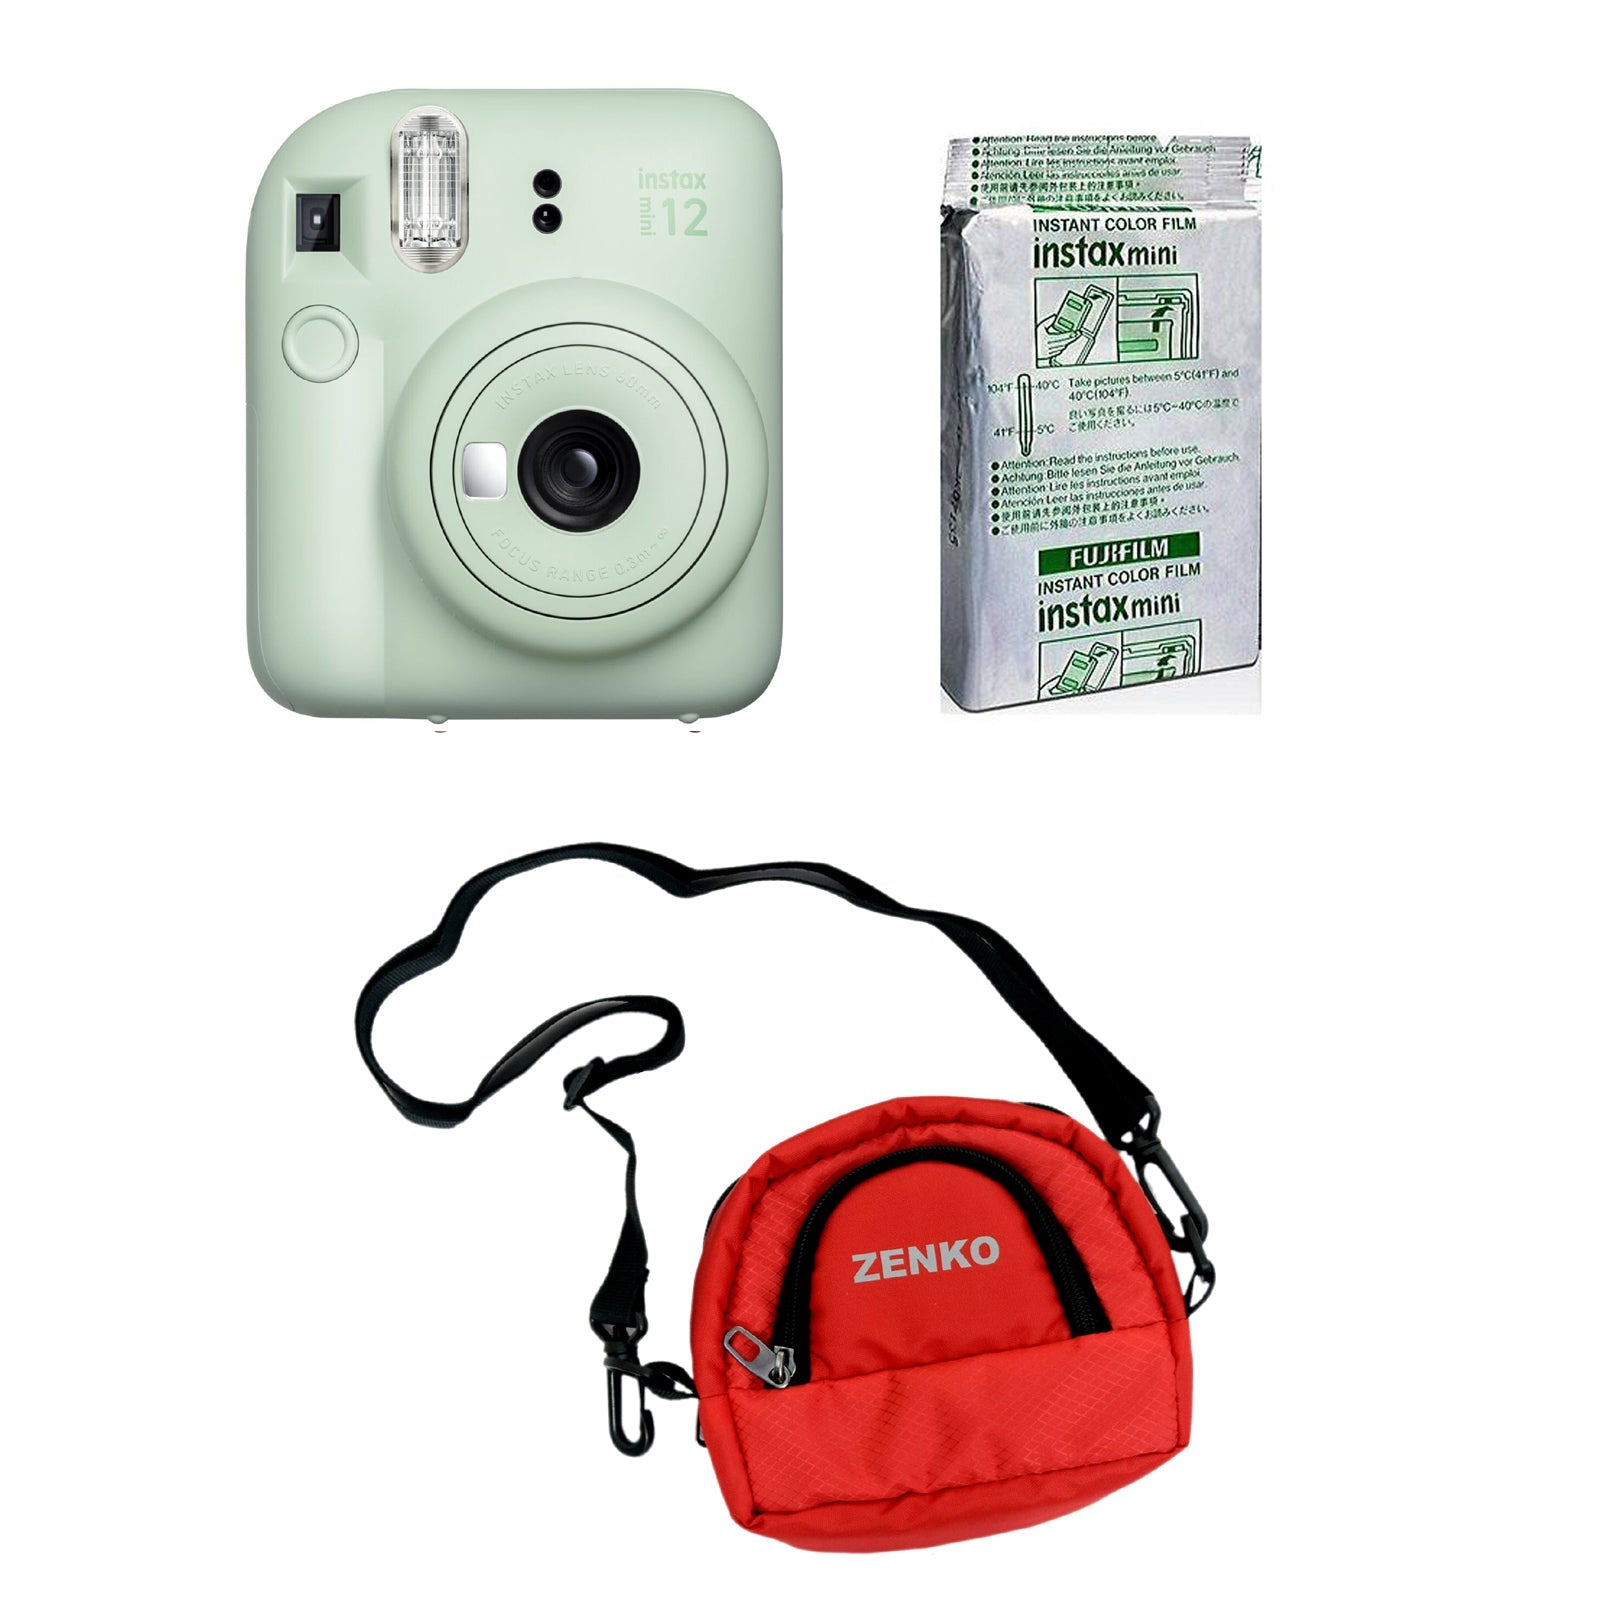 FUJIFILM INSTAX Mini 12 Instant Film Camera with 10X1 Pack of Instant Film With Red Pouch Kit (Mint Green, 10 Exposures)